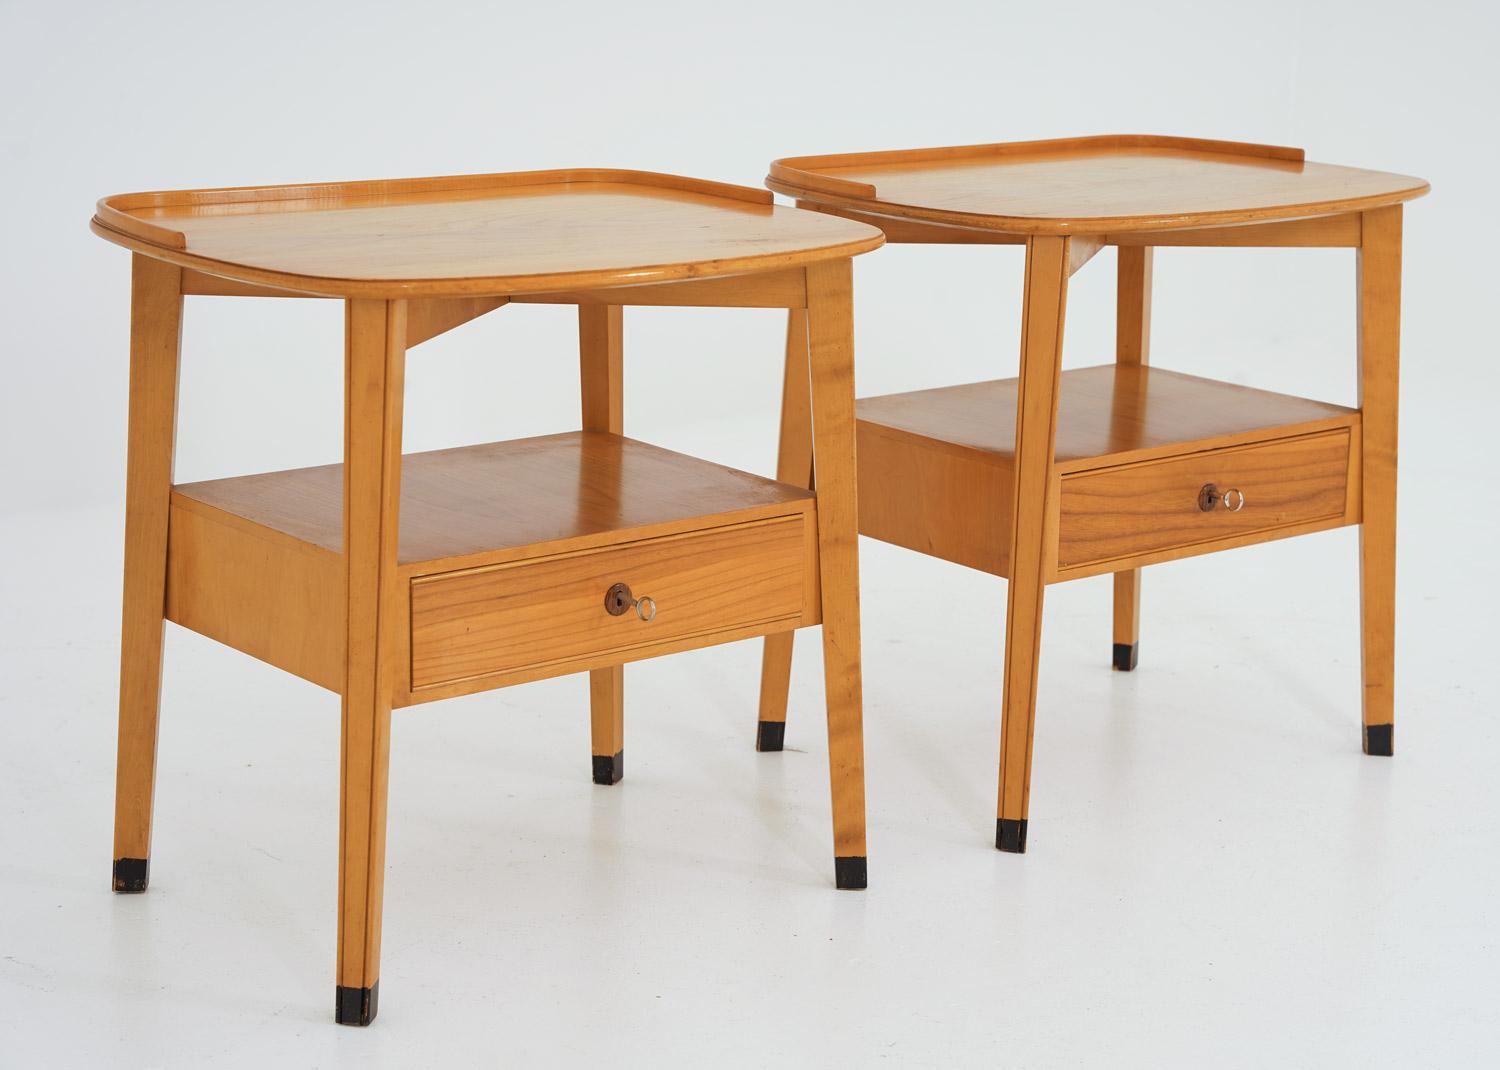 A pair of rare bedside tables manufactured by Nordiska Kompaniet (NK), Sweden, ca 1950.
The design is minimalistic with beautiful details, such as the dark wood, surrounding the key hole.

Condition: Good original condition with some light scratches